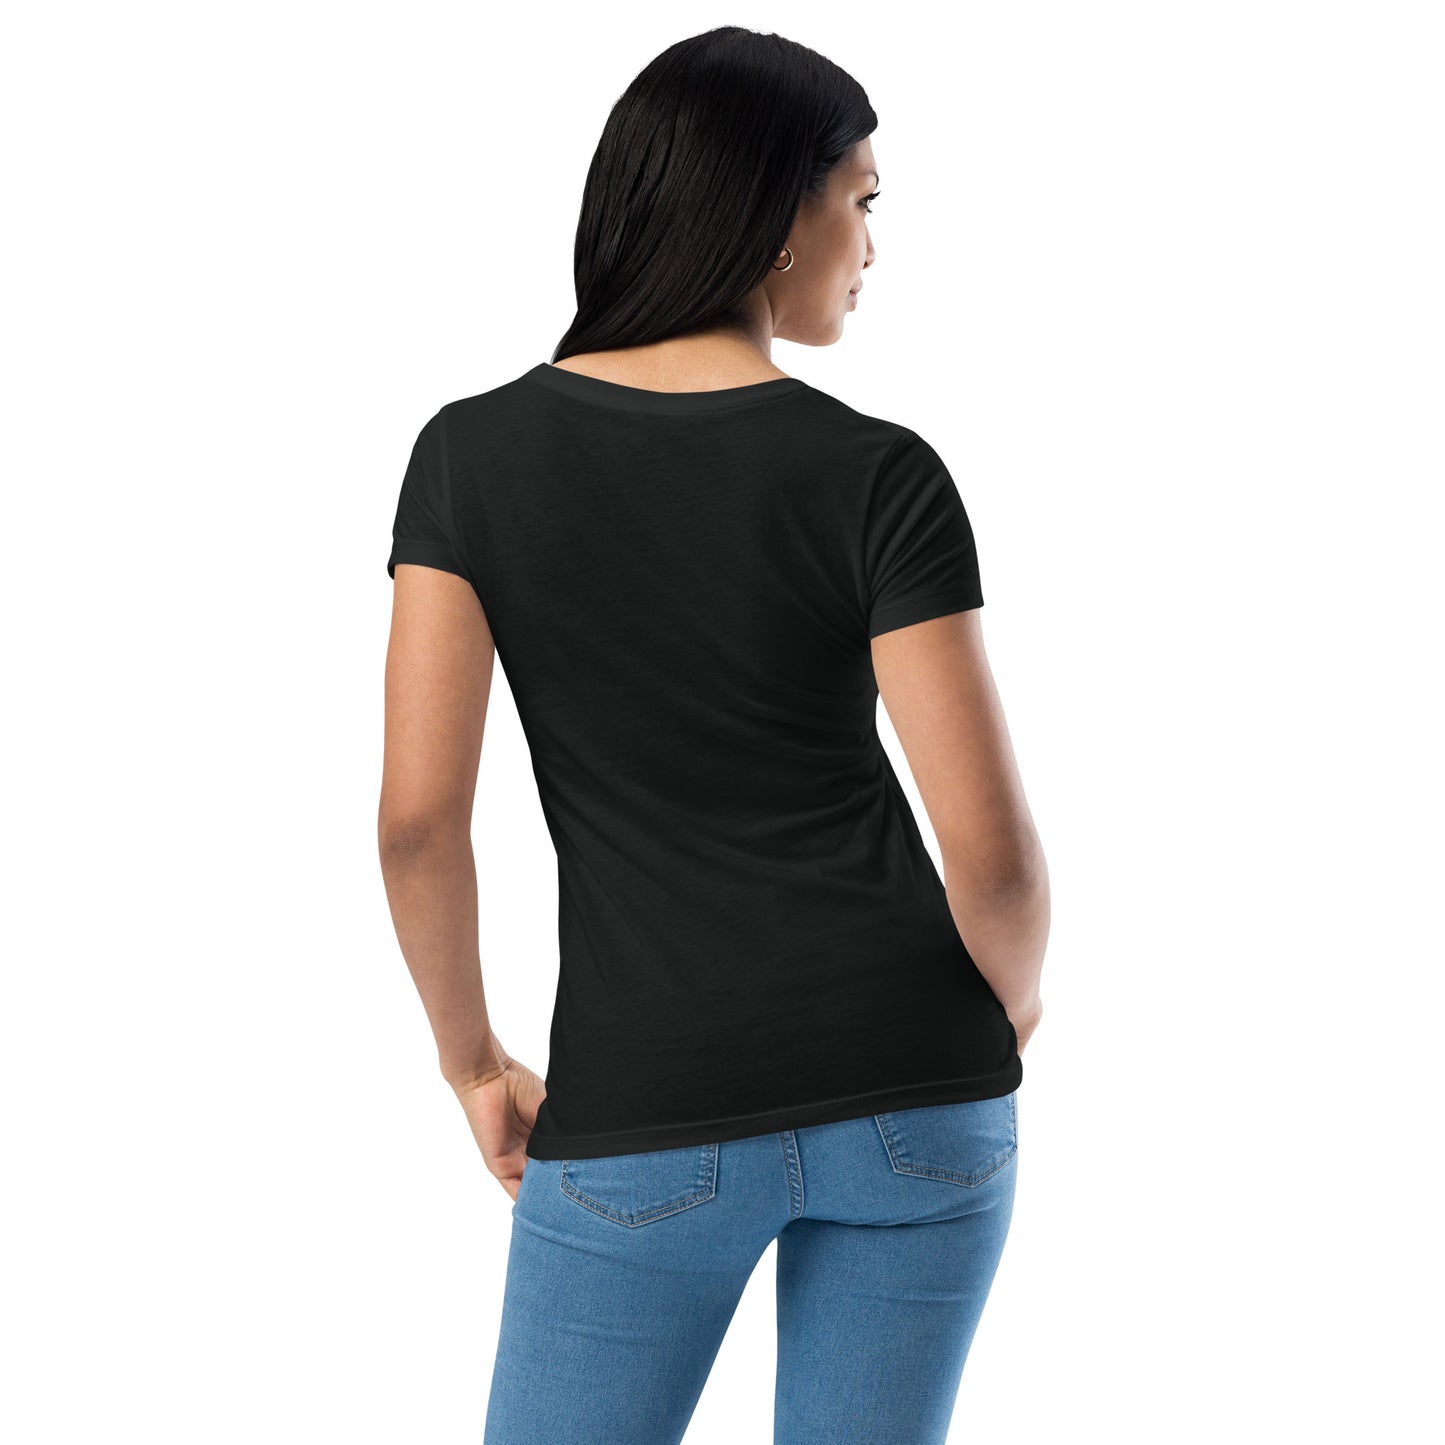 Beverly Hills Women’s Fitted T-Shirt